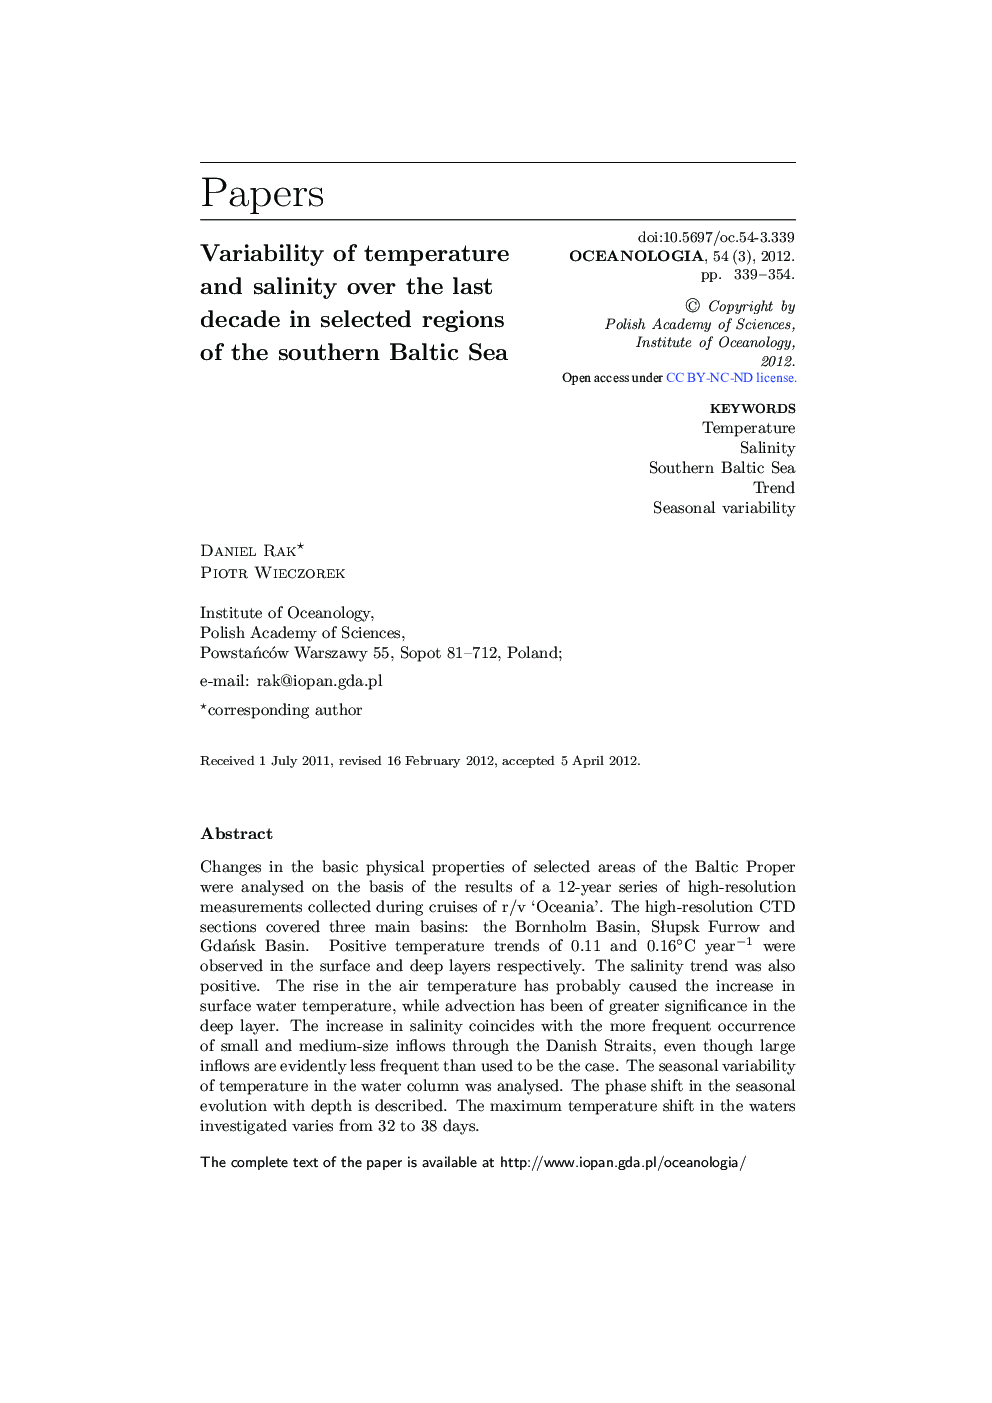 Variability of temperature and salinity over the last decade in selected regions of the southern Baltic Sea 